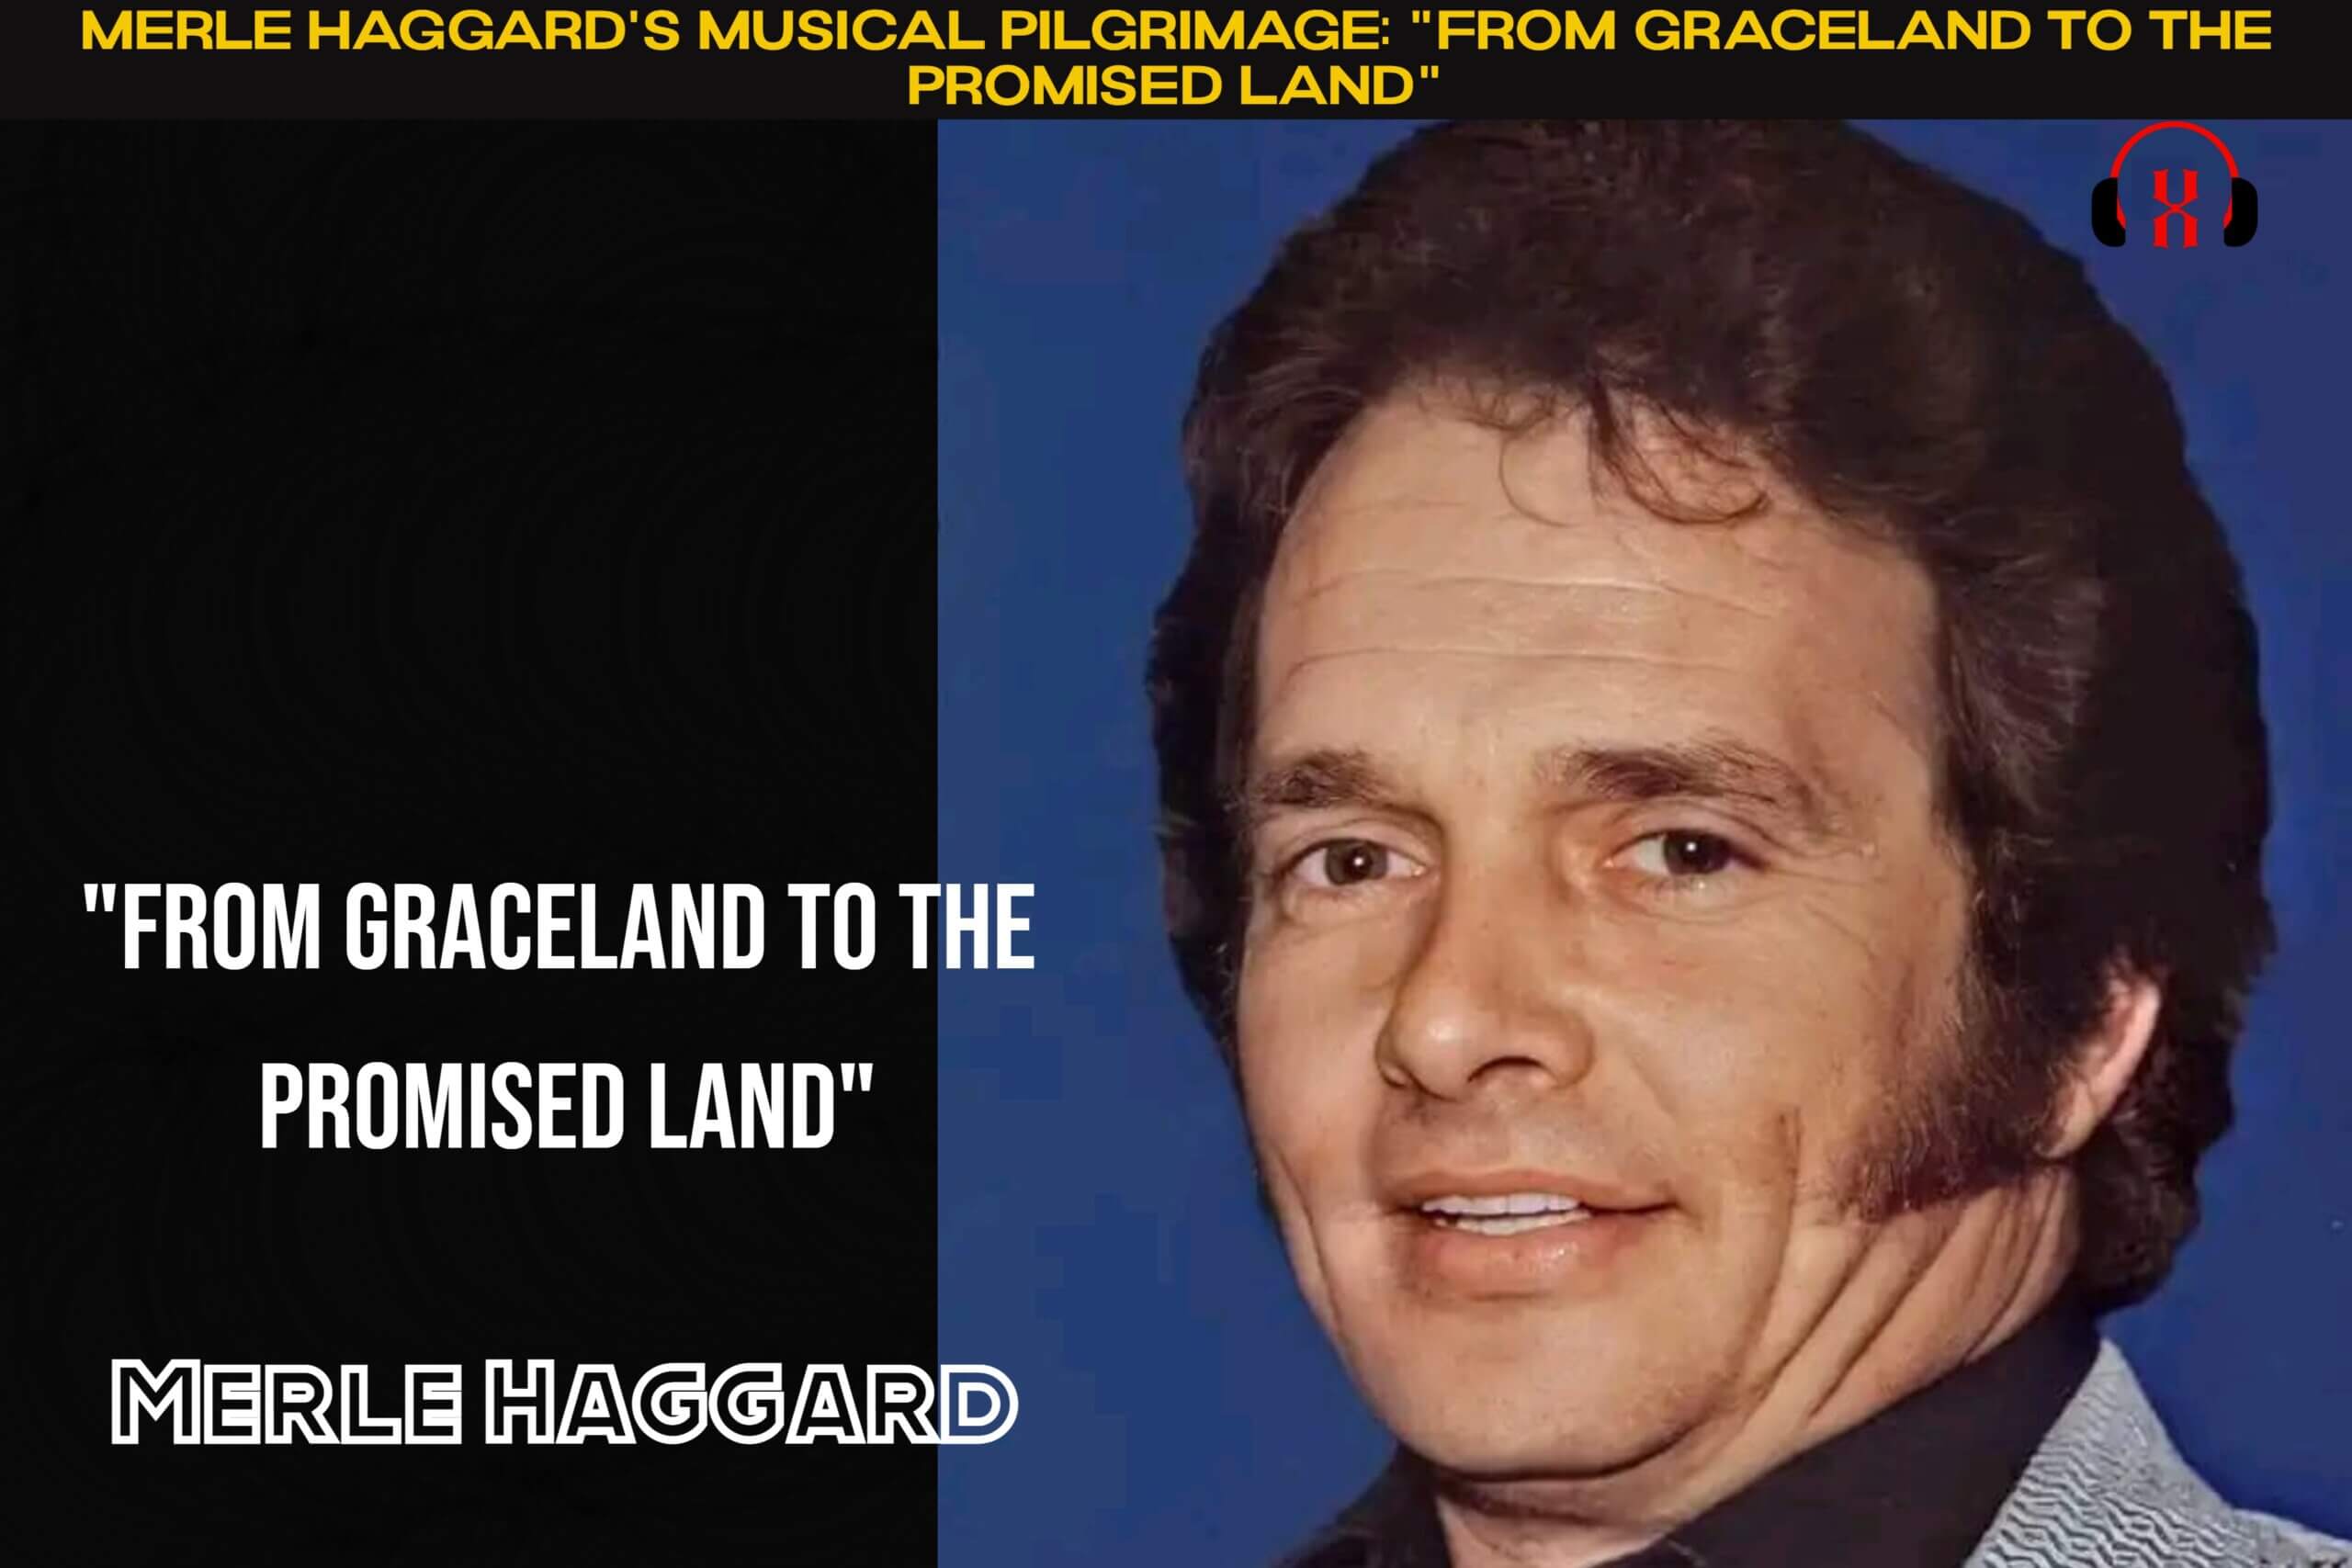 Merle Haggard's Musical Pilgrimage: "From Graceland to the Promised Land"